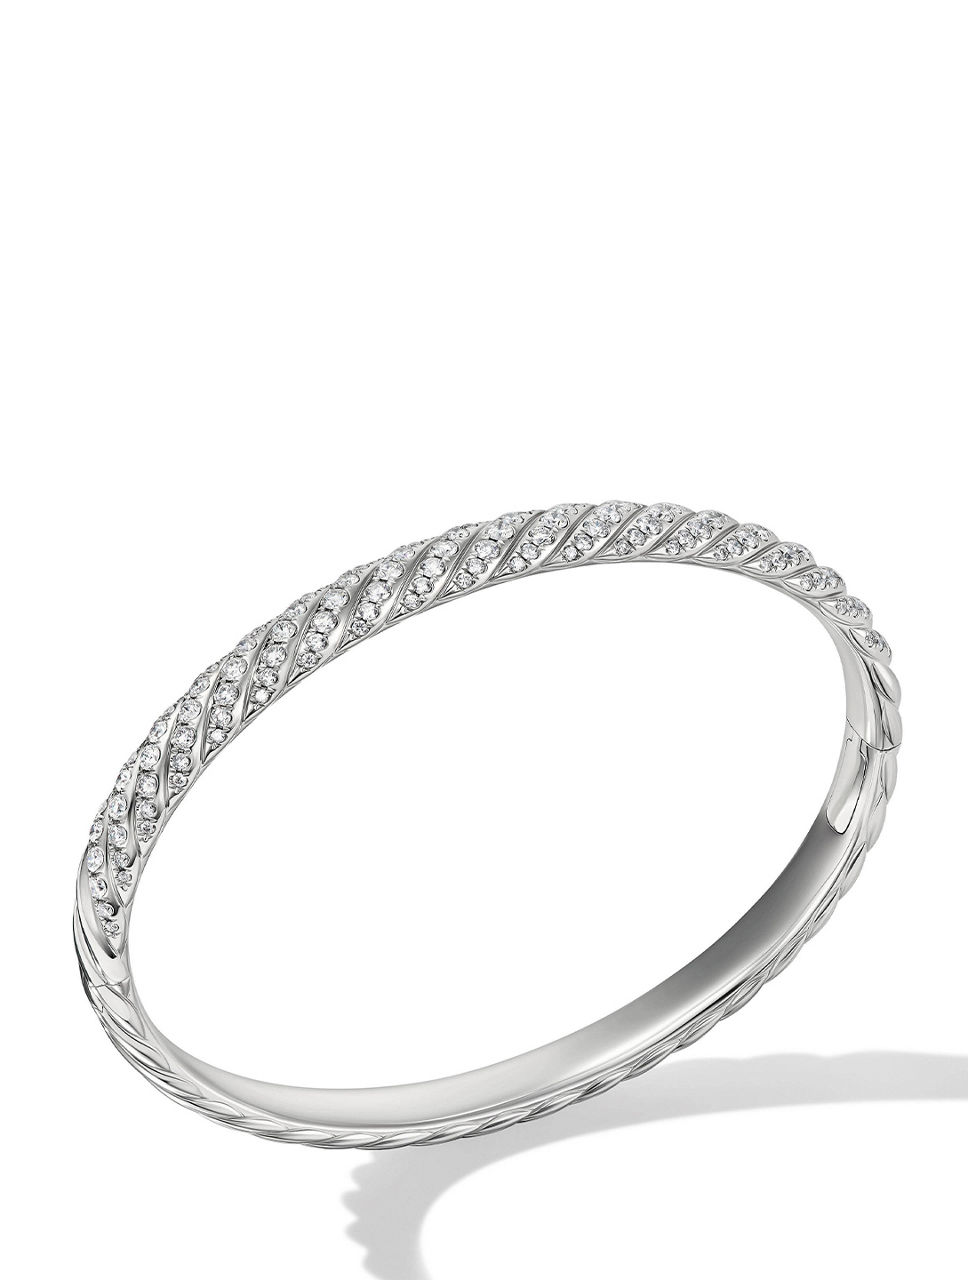 DAVID YURMAN Sculpted Cable Bangle Bracelet In 18k White Gold With